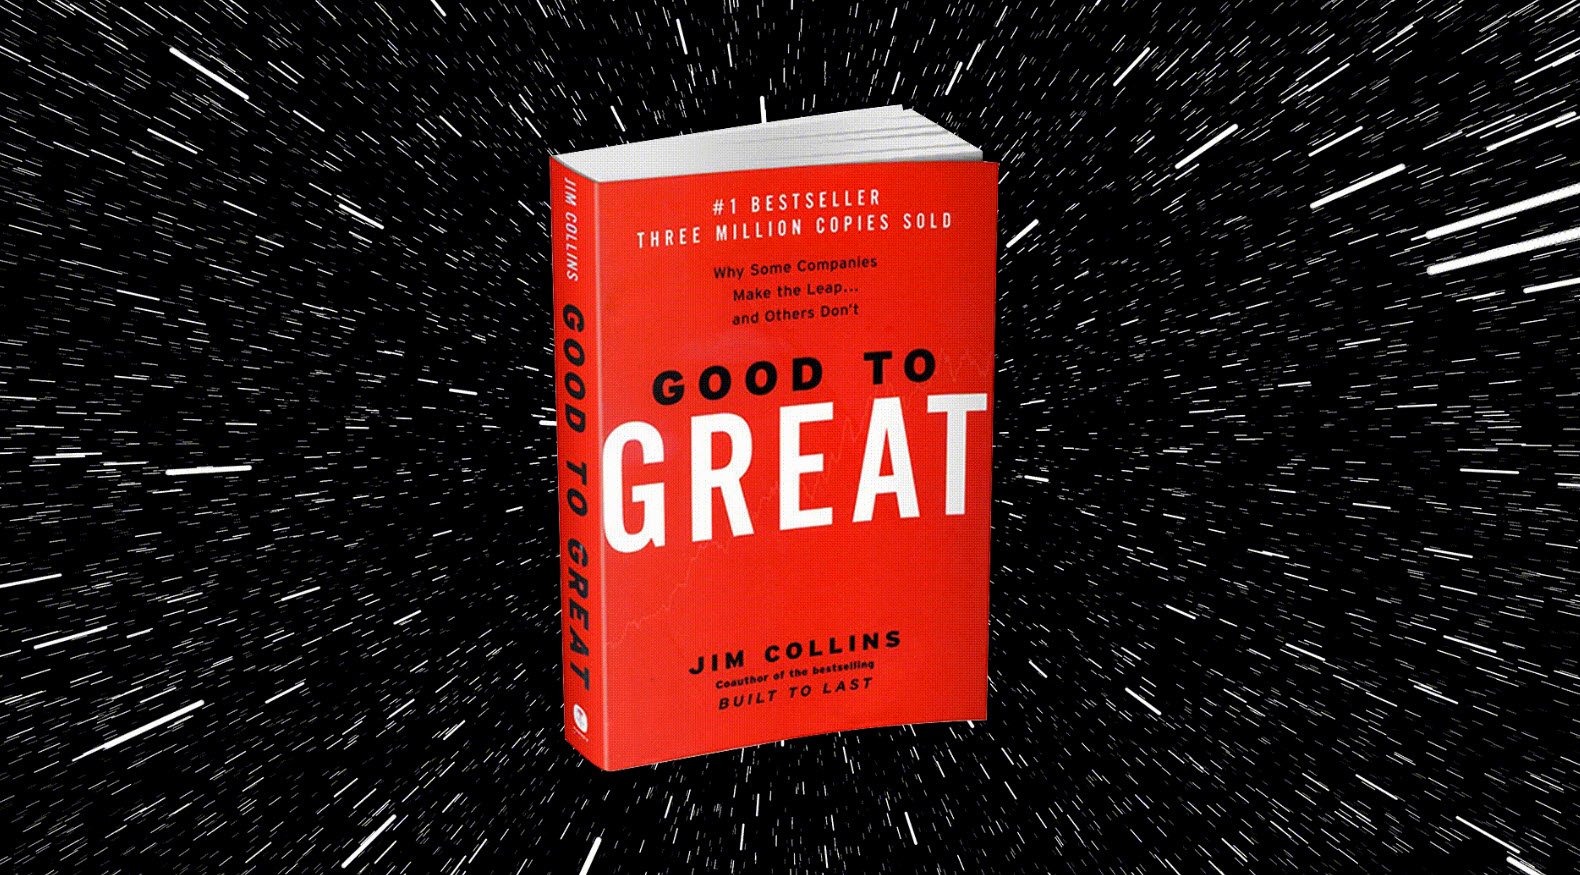 Good to Great by Jim Collins